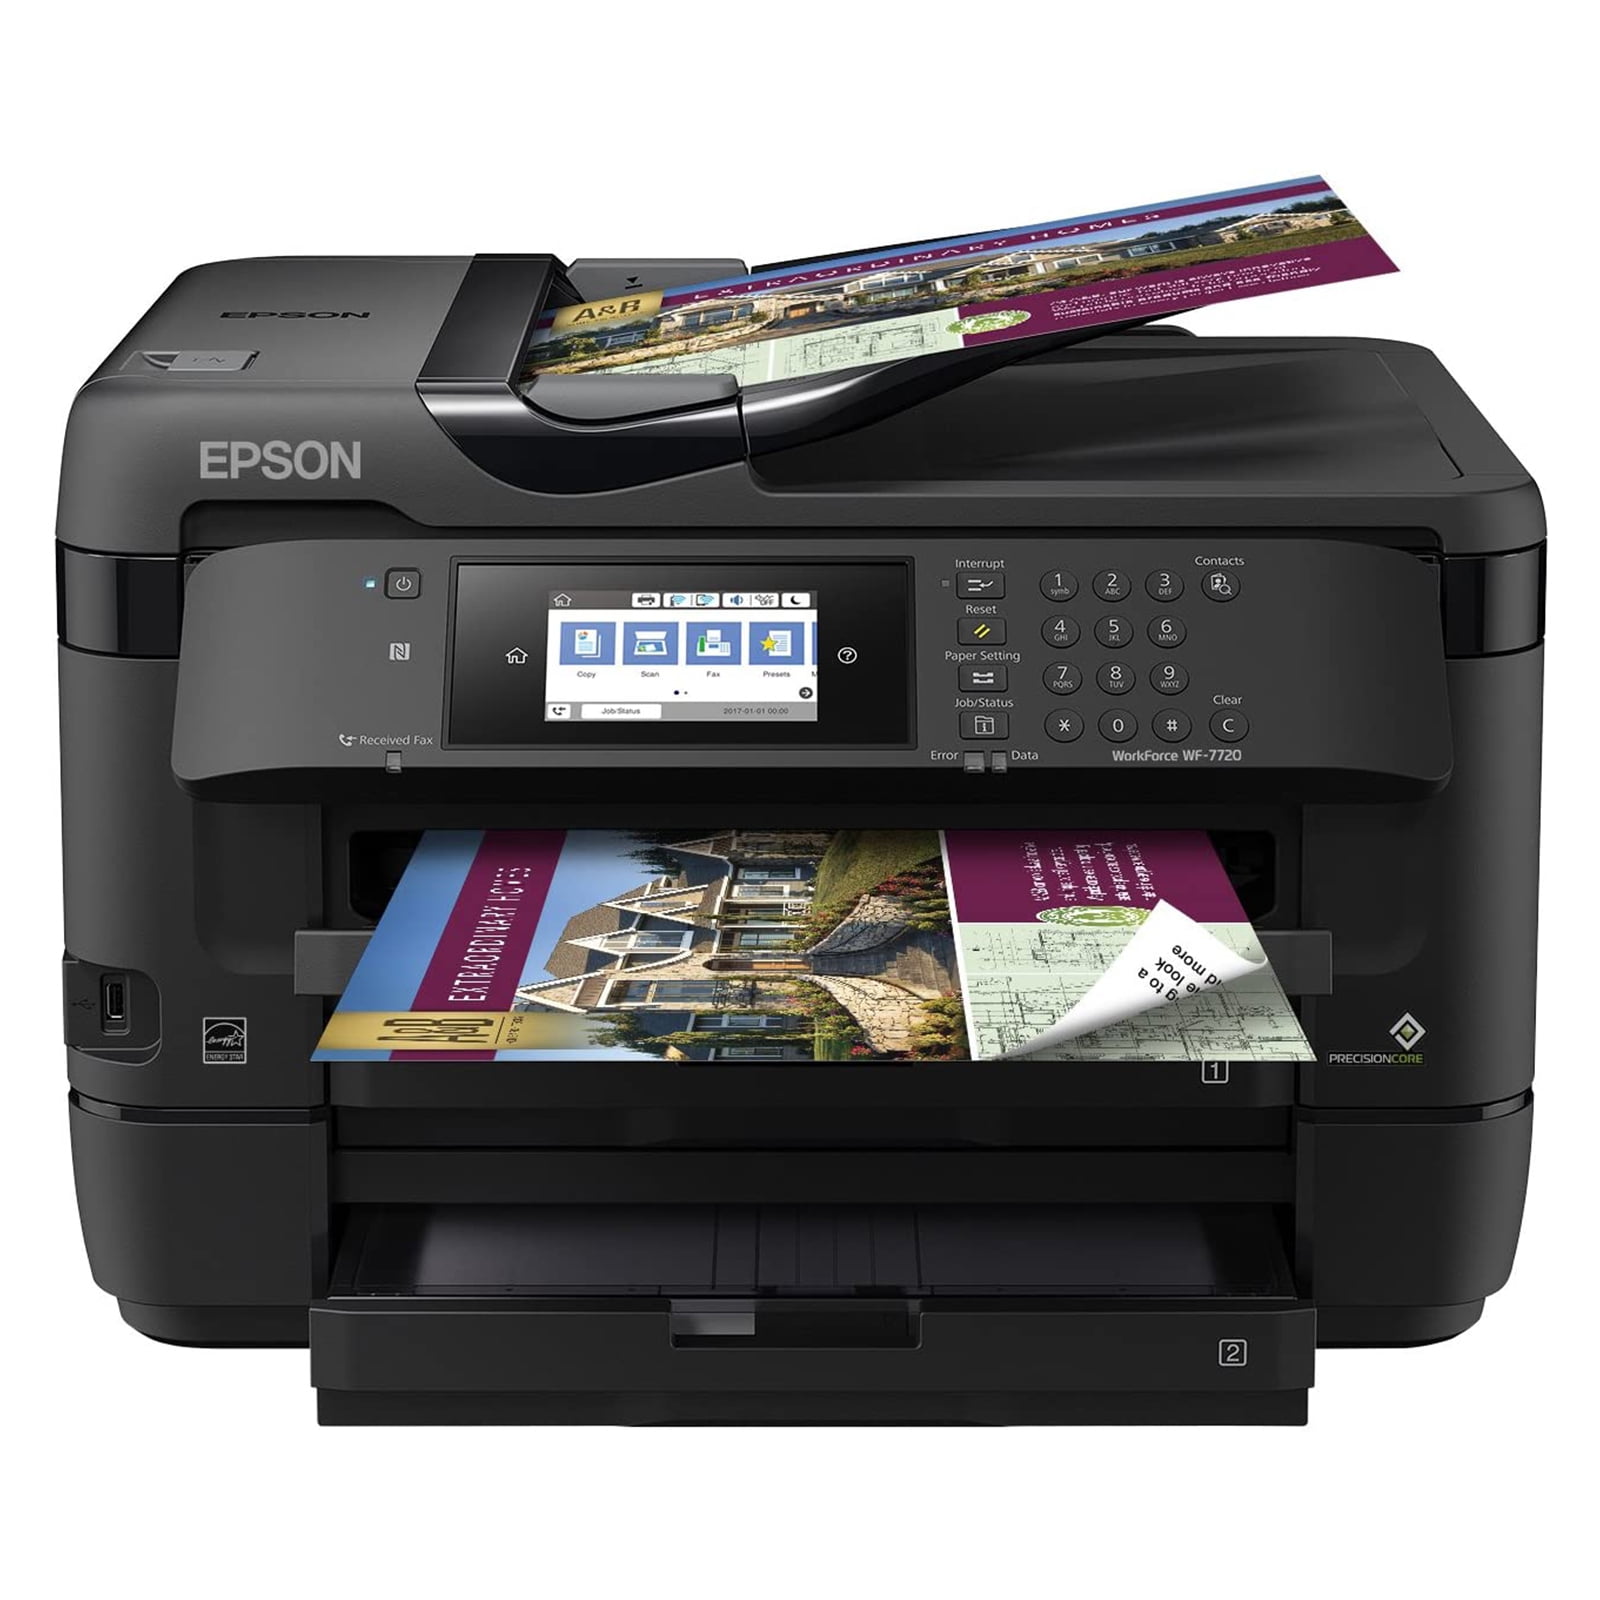 Epson WorkForce WF-7720 Wireless Wide-format Color Inkjet Printer with Copy, Scan, Fax, Wi-Fi Direct and Ethernet